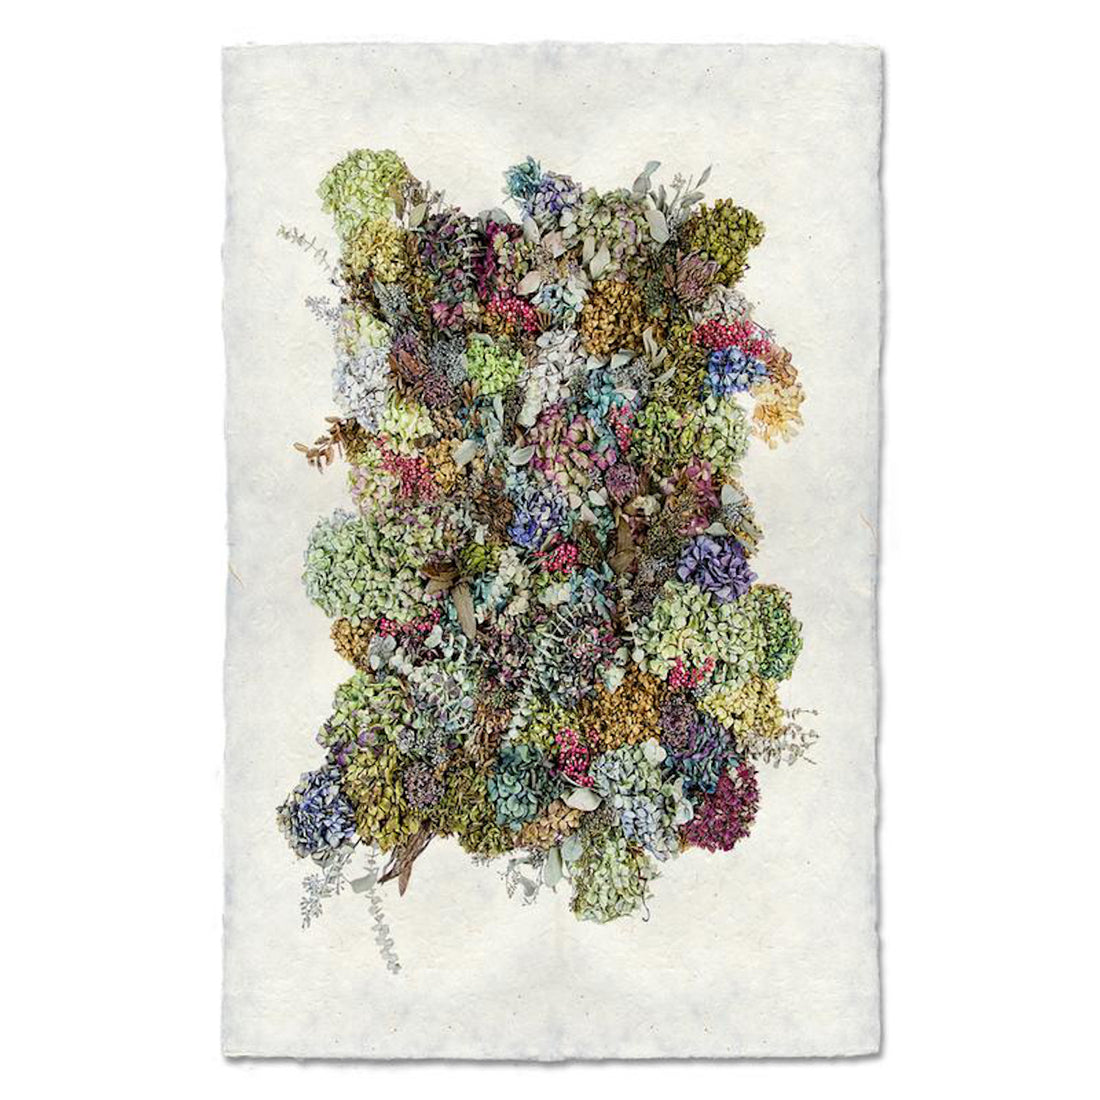 A high-quality Collective Hydrangea Art Print handmade paper with a bunch of flowers on it from Barloga Studios.